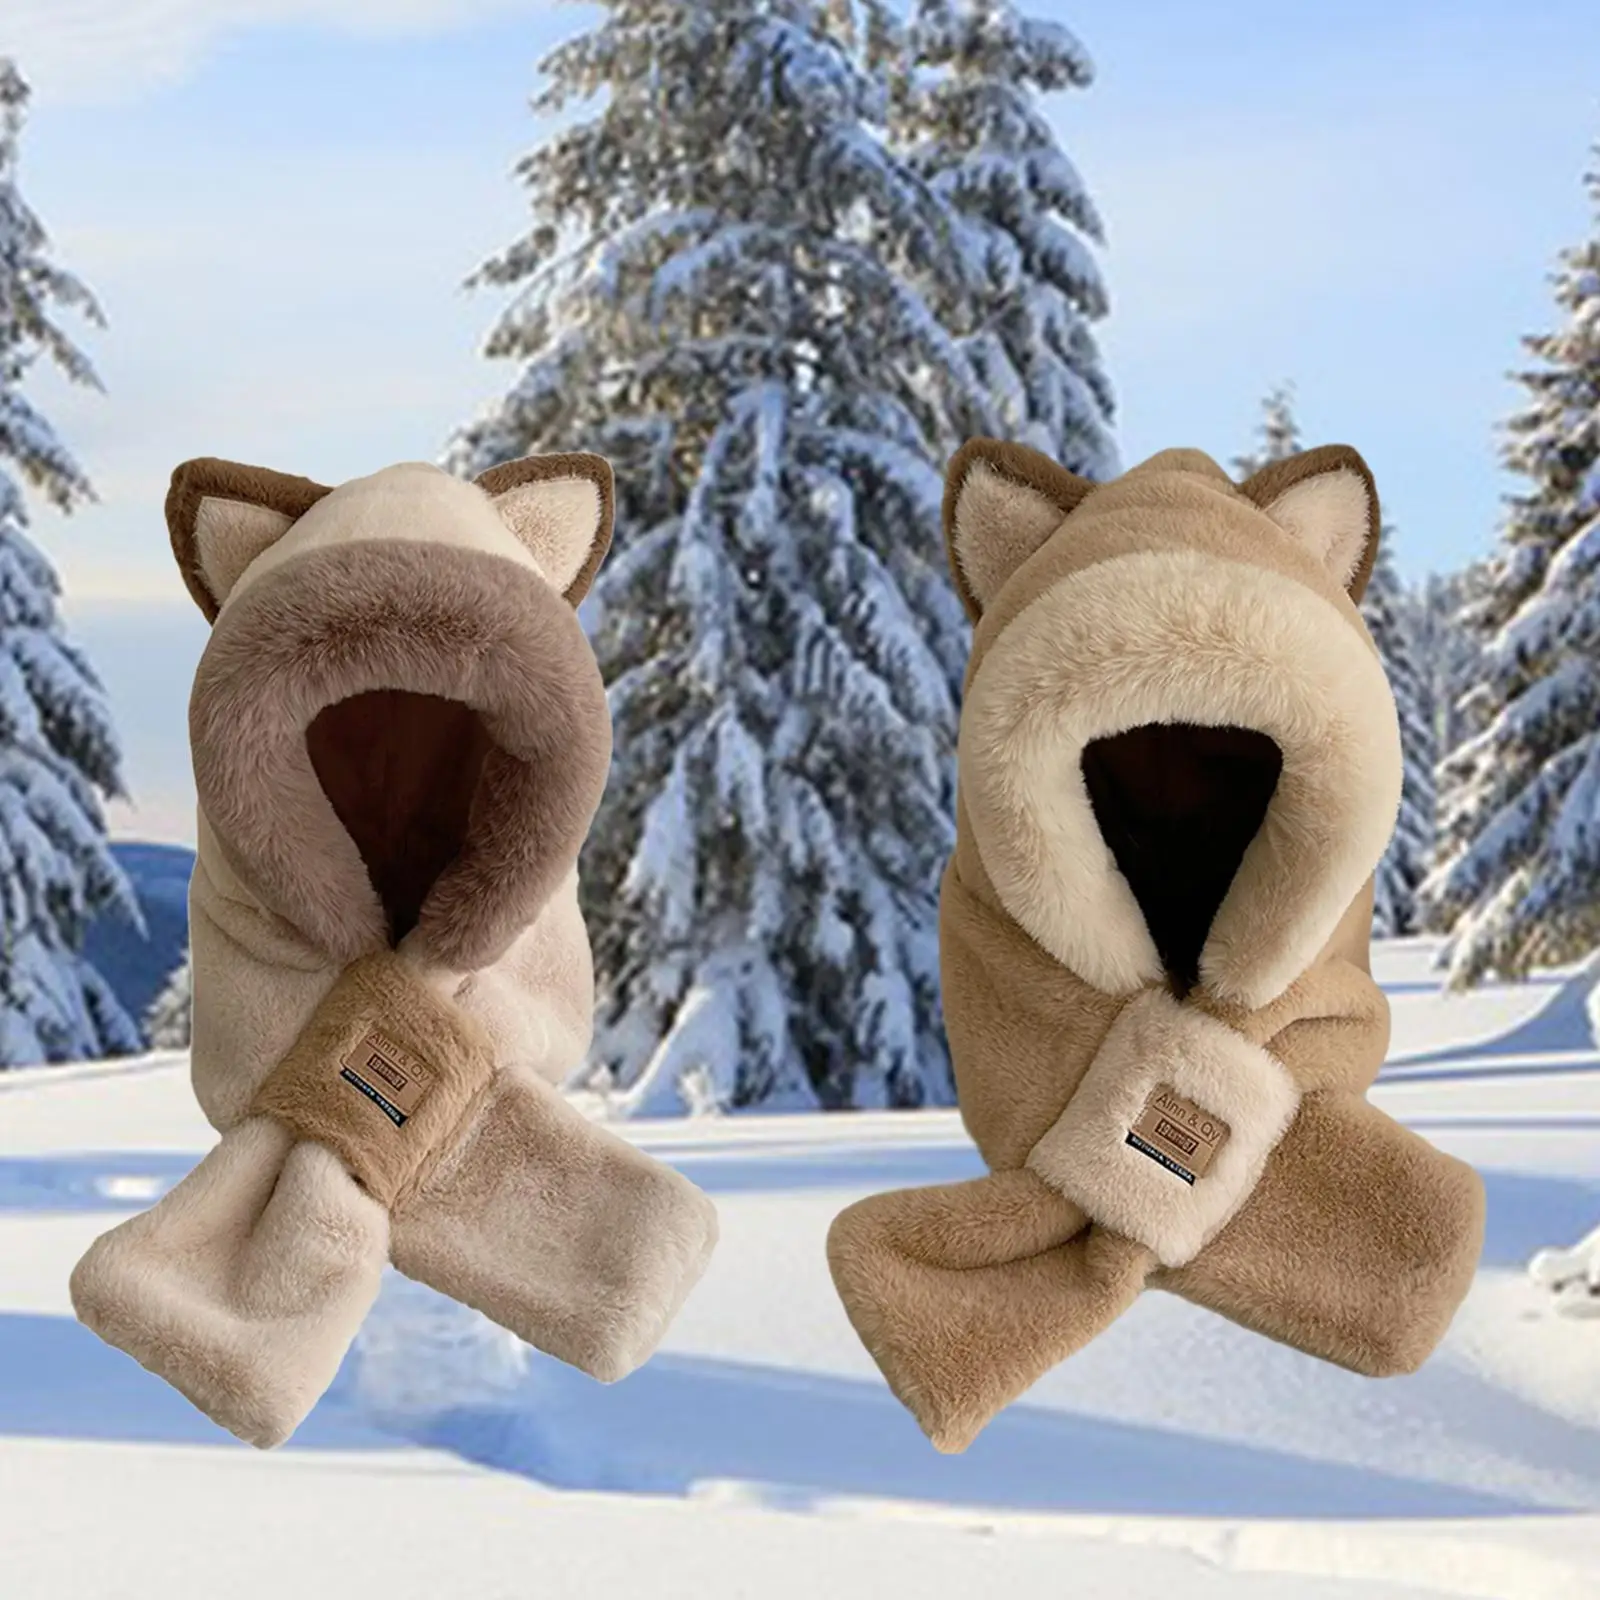 Plush Hooded Scarf 2 in 1 Ear Protection Adorable Hoodie Costume Hats for Outdoor Sports Themed Travel New Year Gift